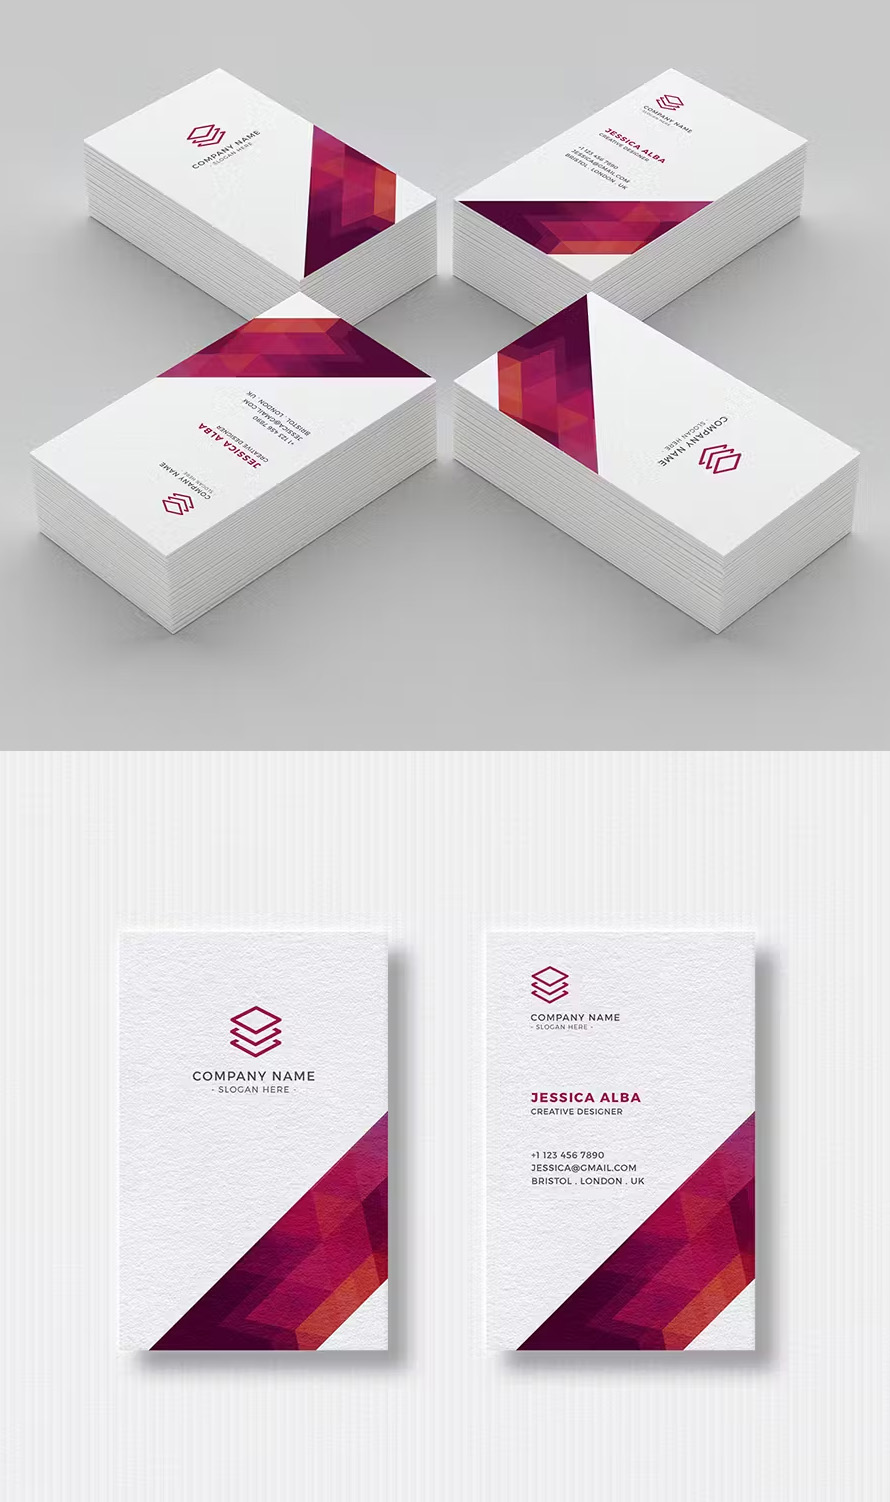 Minimal Business Card For Any Businesses